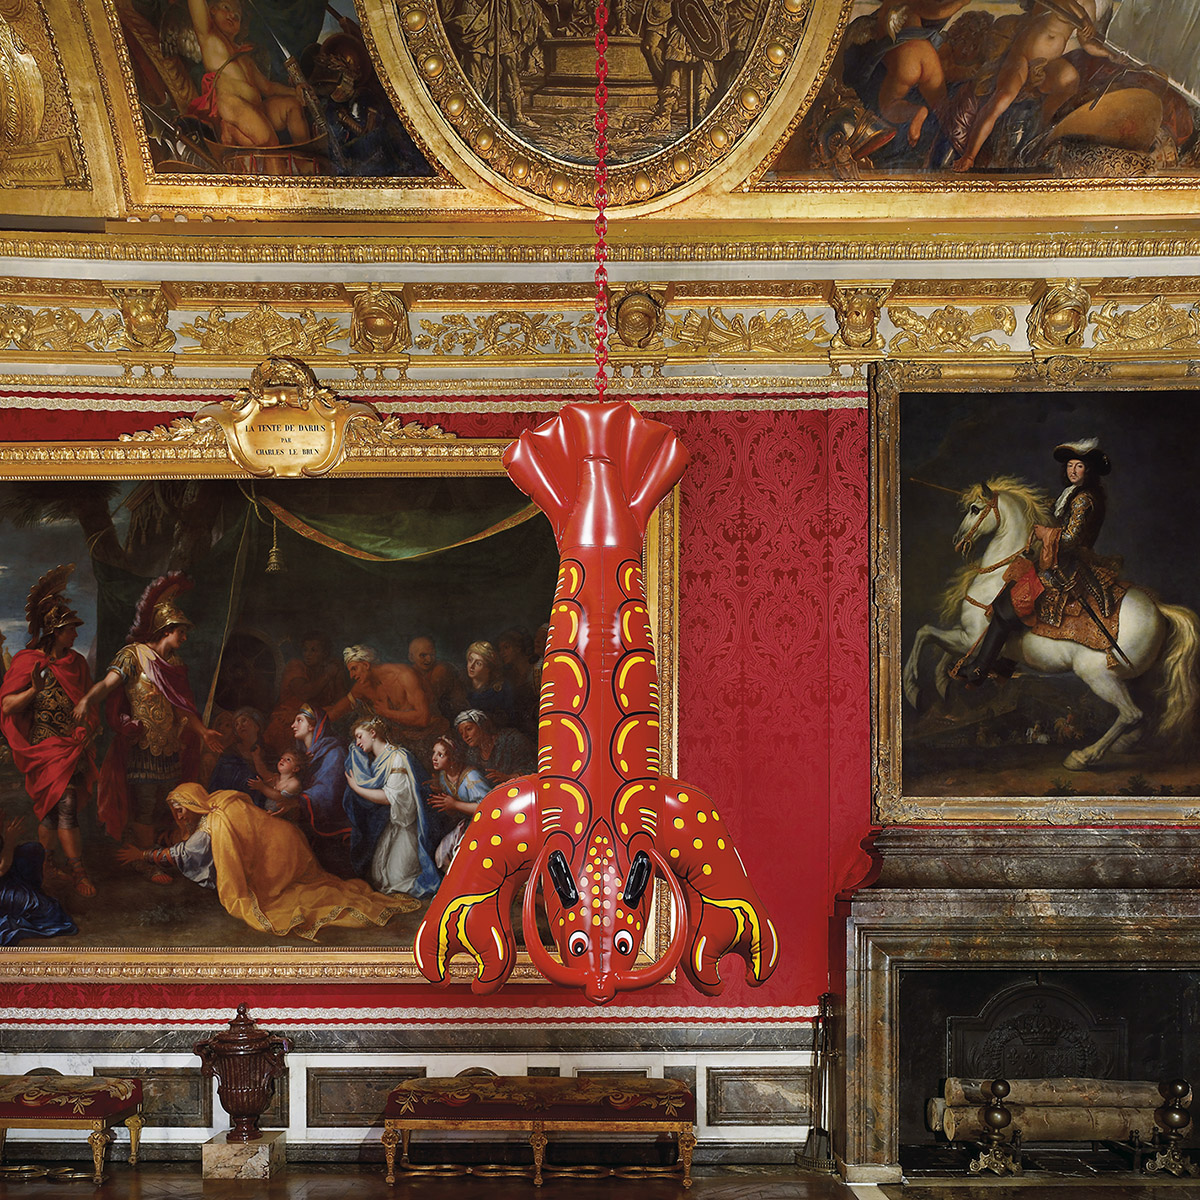 In October 2008, Jeff Koons: Versailles opened with 17 sculptures on view, including Pink Panther, Split-Rocker, New Hoover Convertibles Green, Green, Red, New Hoover Deluxe Shampoo Polishers, New Shelton Wet/Dry 5 Gallon Displaced Tripledecker, & Lobster #jeffkoons #versailles